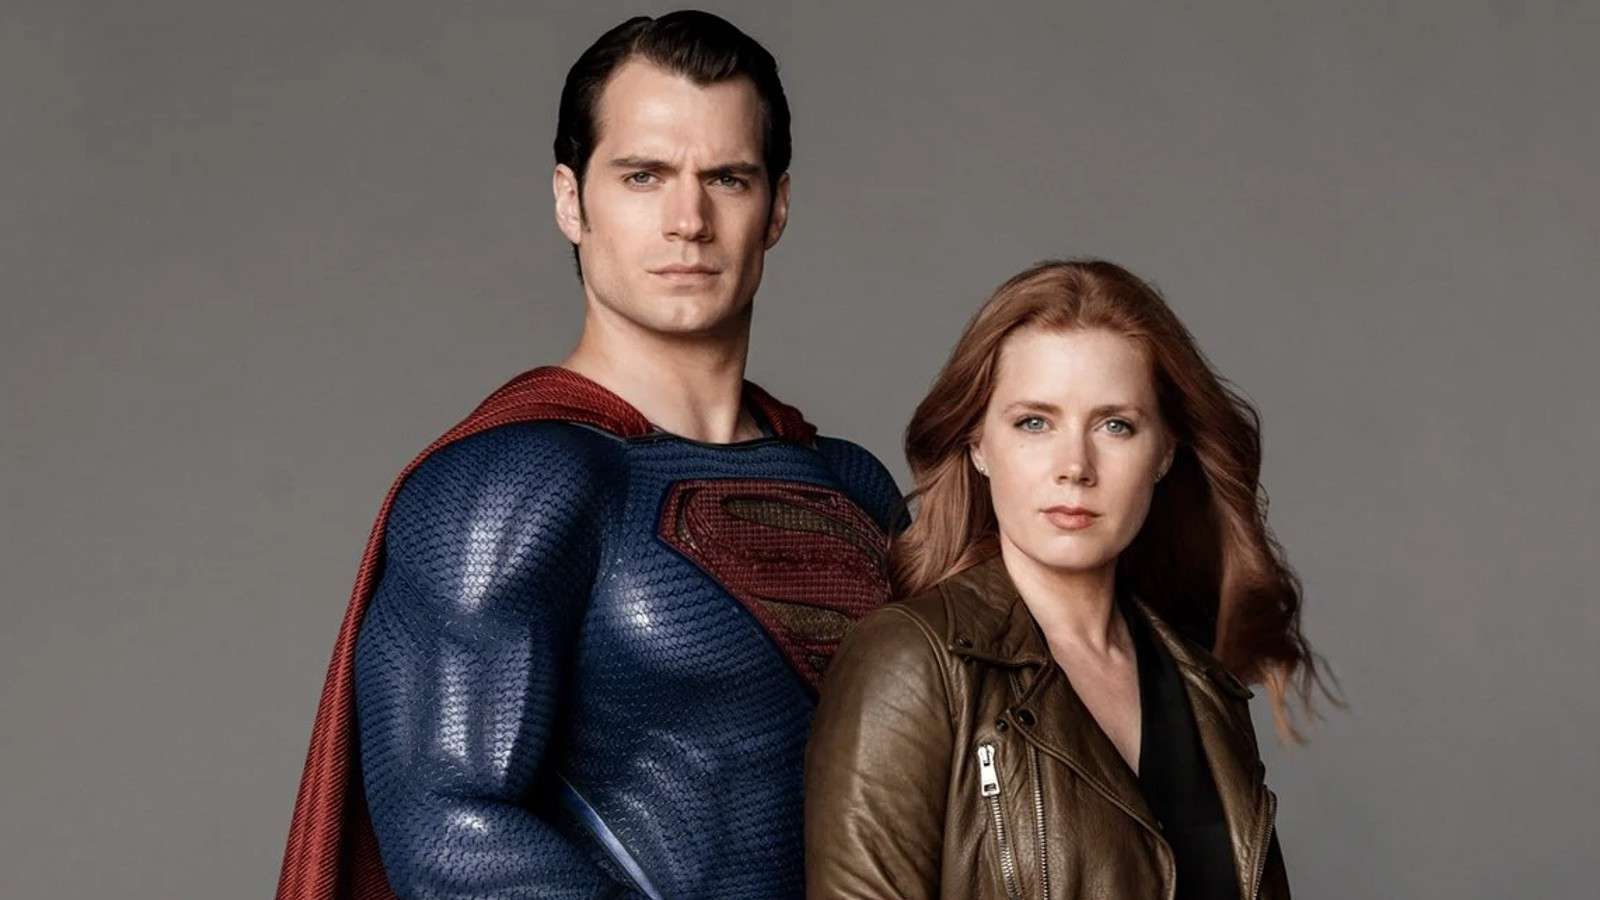 Henry Cavill and Amy Adams as Superman and Lois lane respectively, who may return for Man of Steel 2